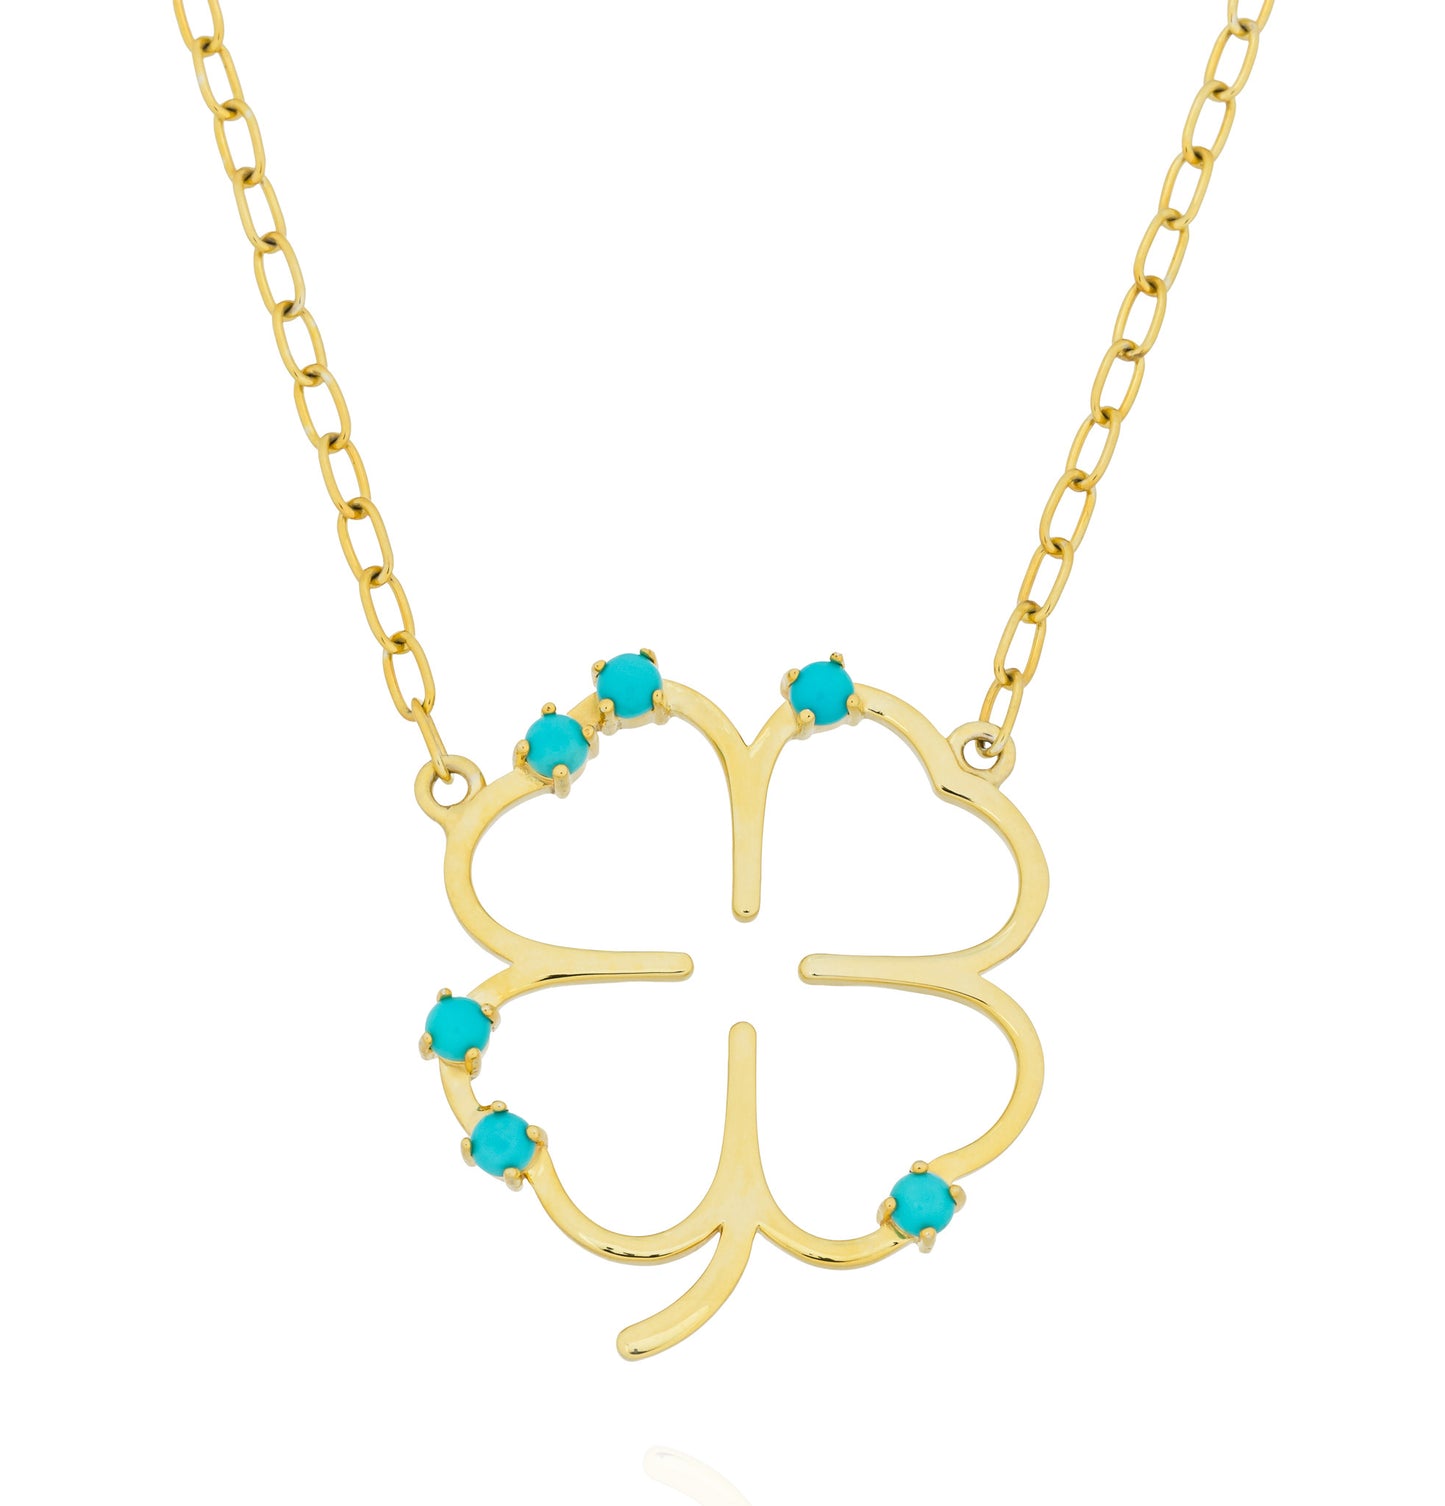 925 Silver Gold Plated 18KT Large Clover Necklace with Turquoise Cabouchon